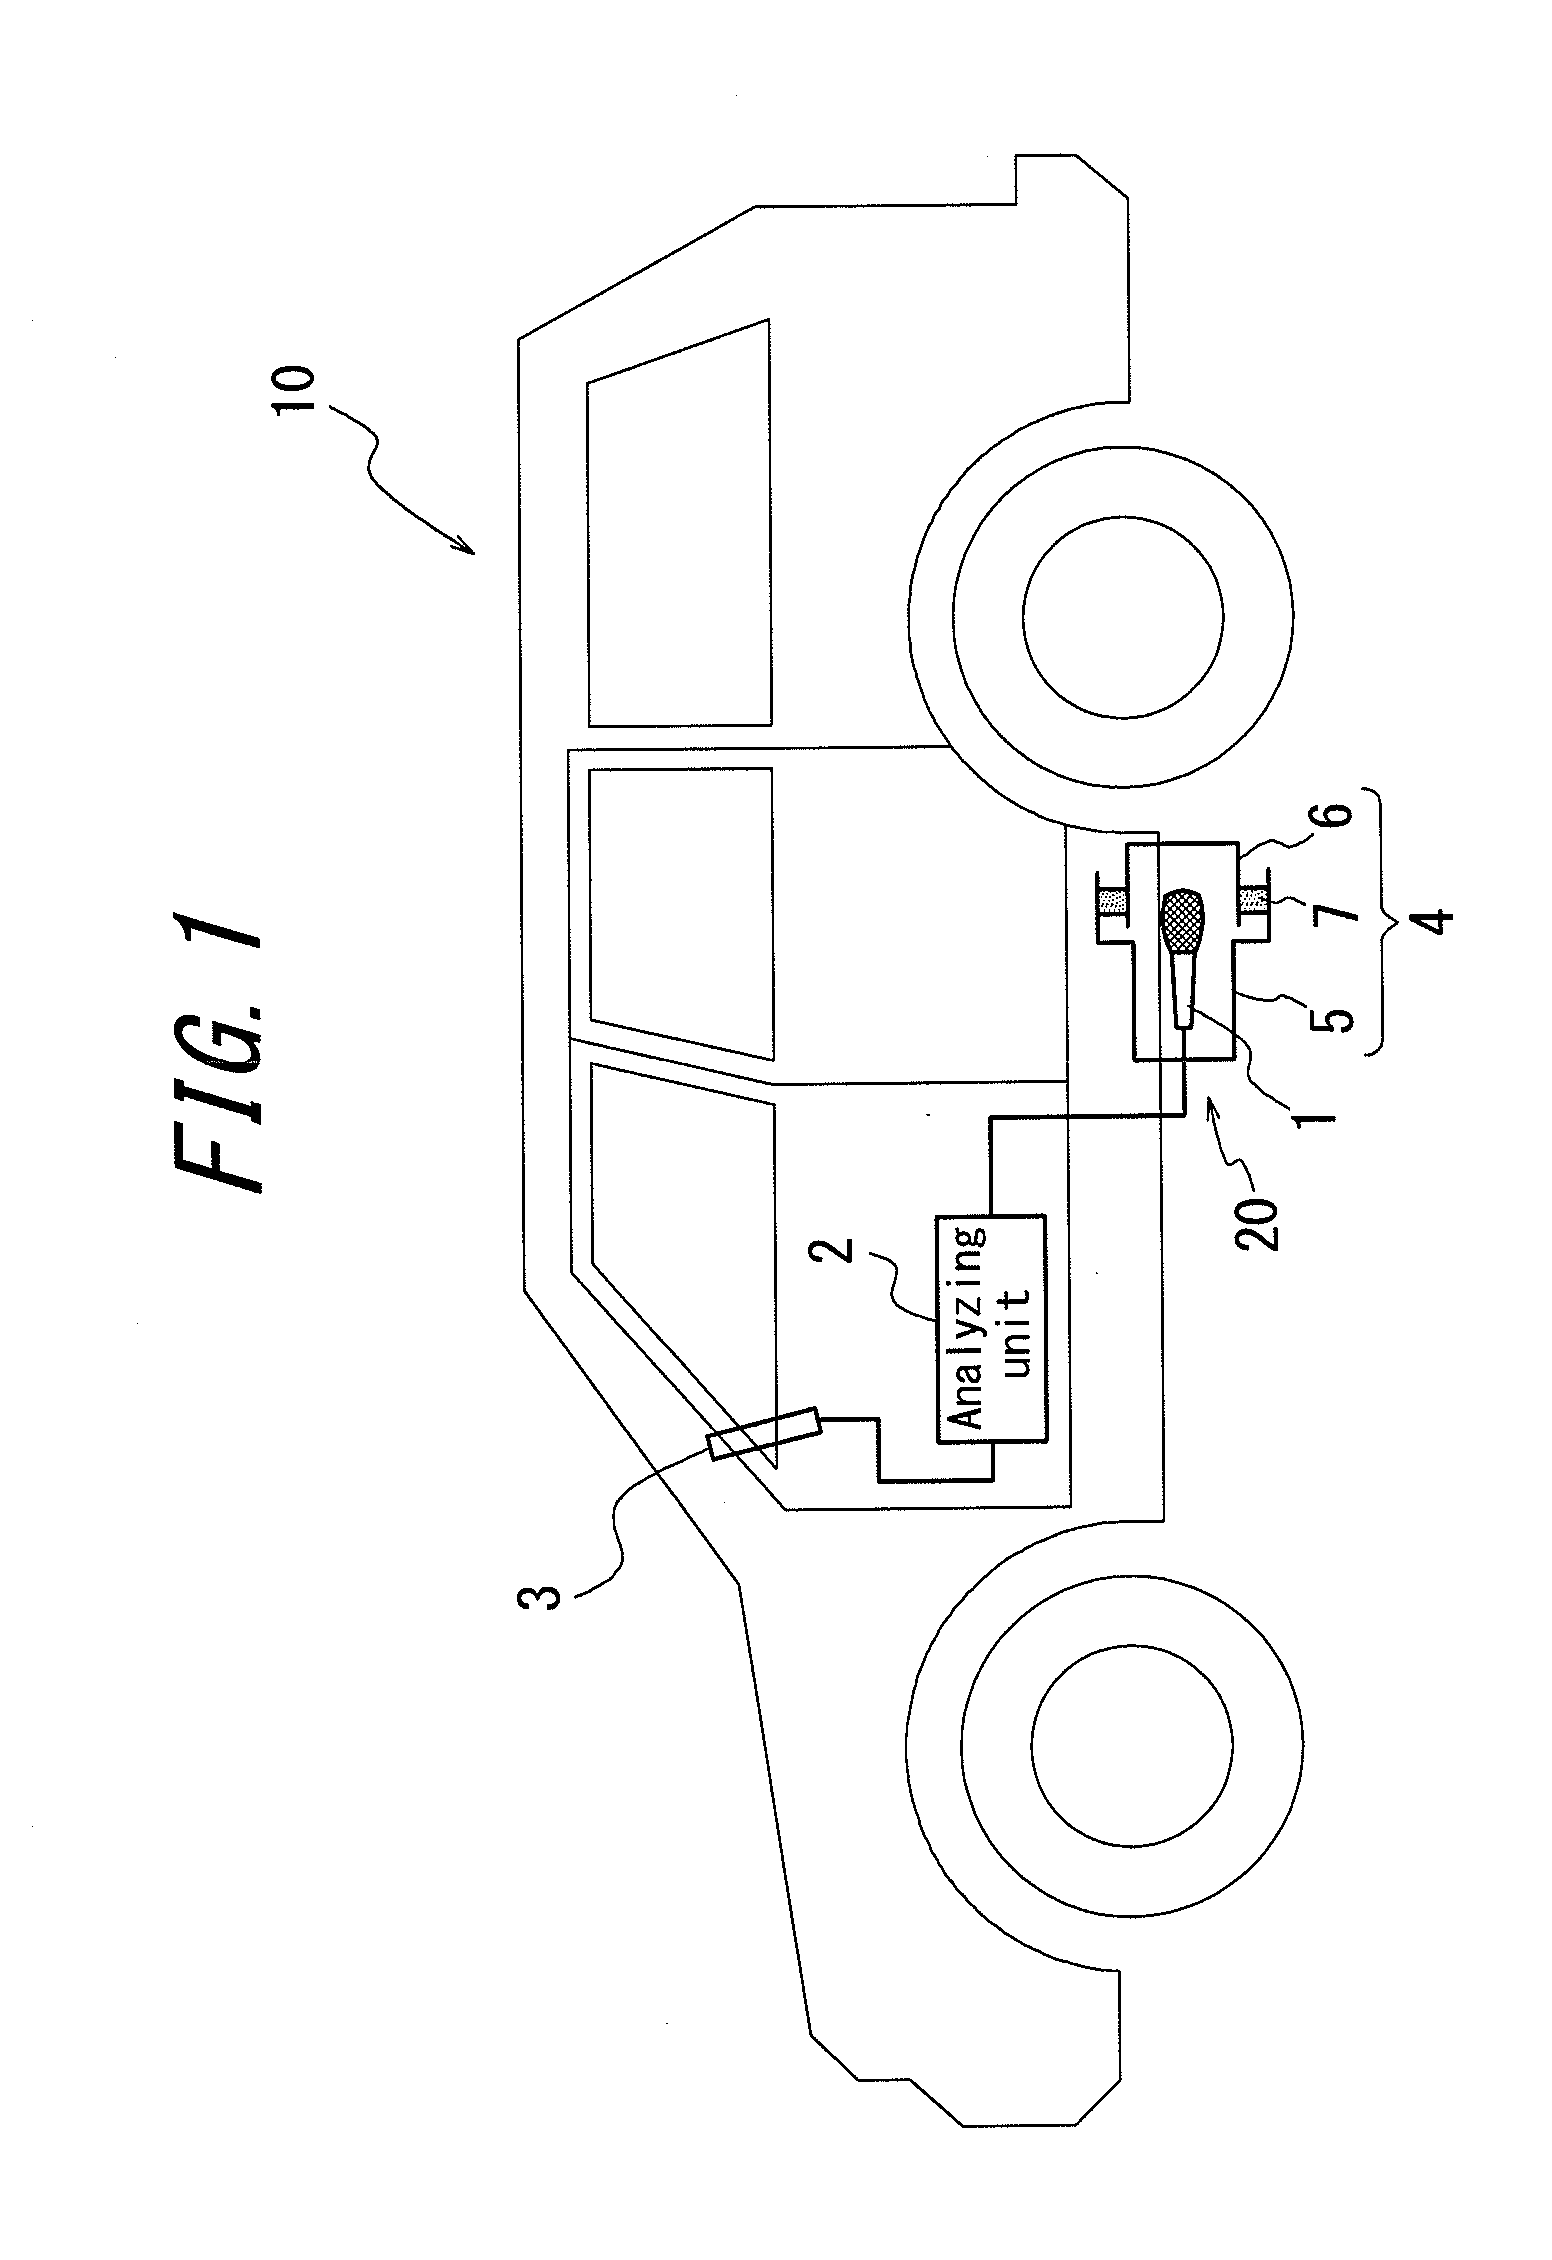 Method for estimating road surface state